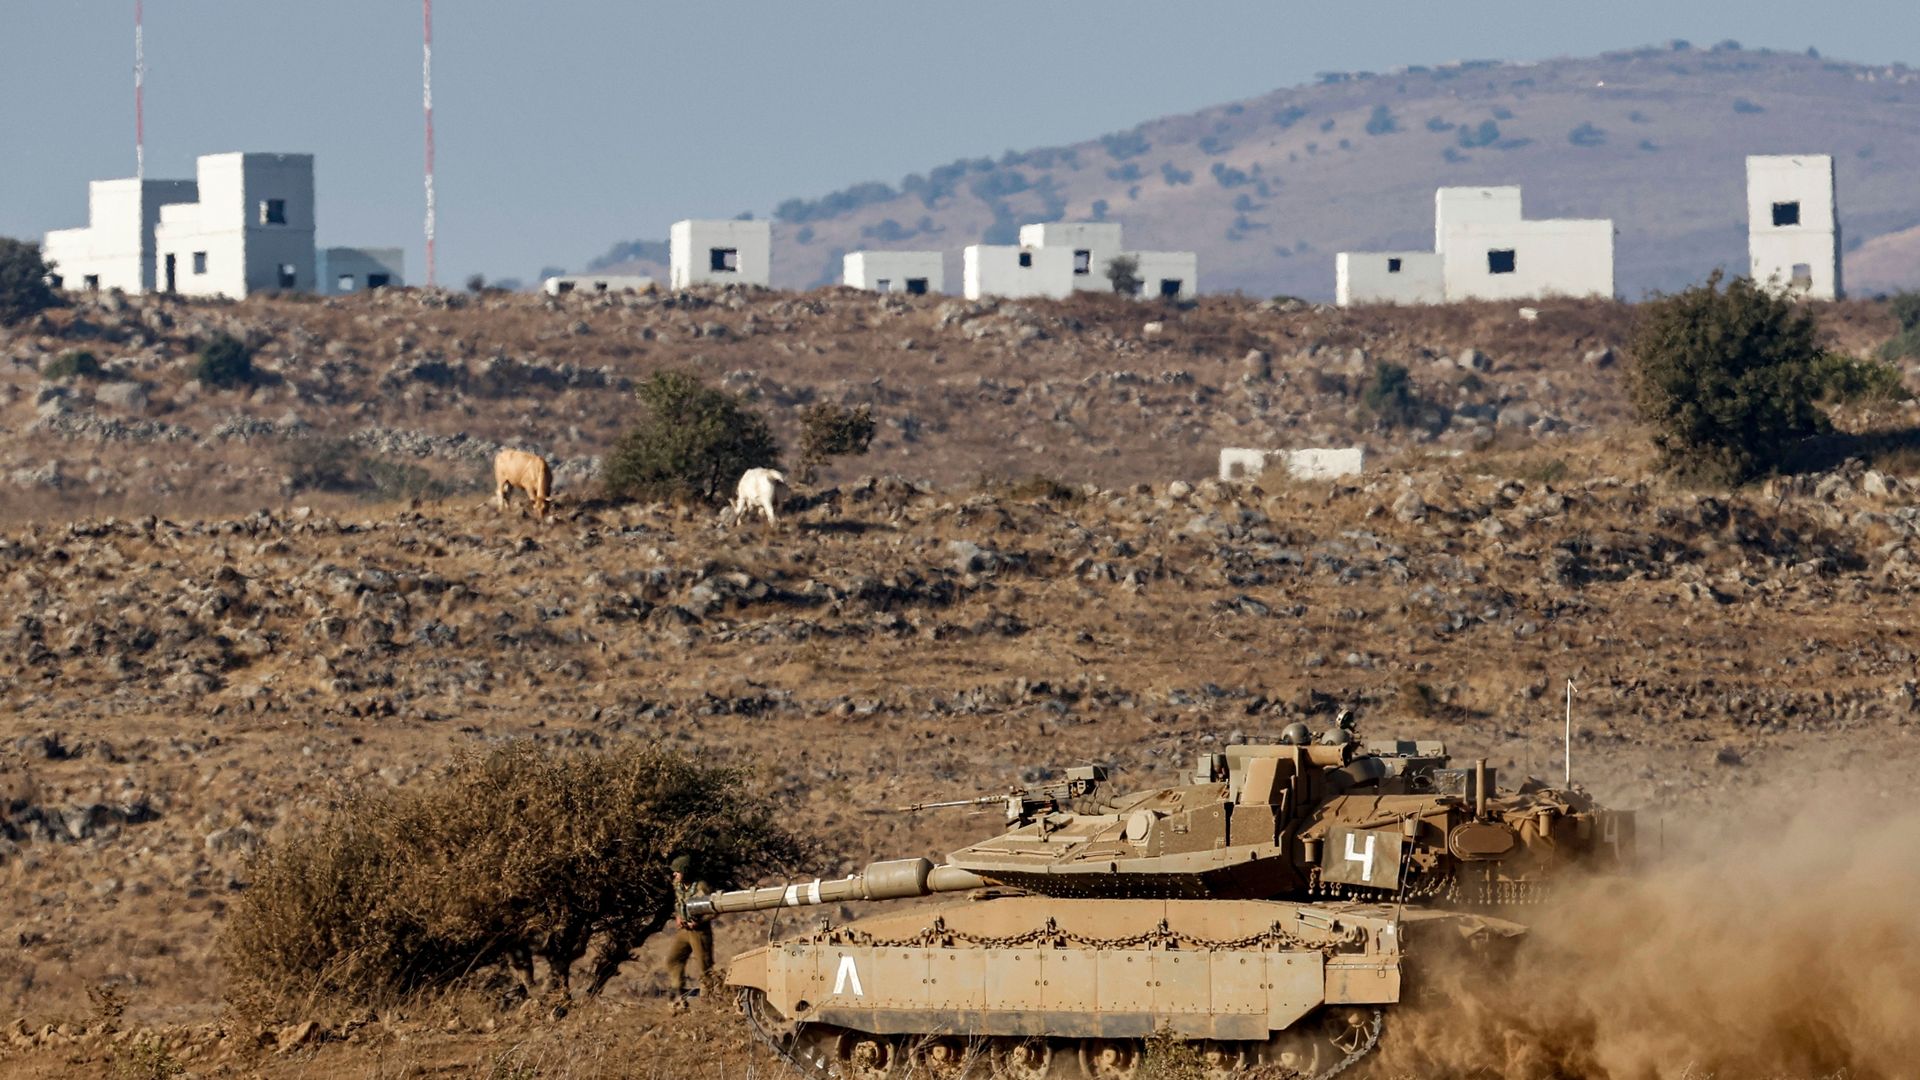 An Israeli Merkava battle tank takes part in a military drill in the Israeli-annexed Golan Heights, near the border with Syria, on August 4